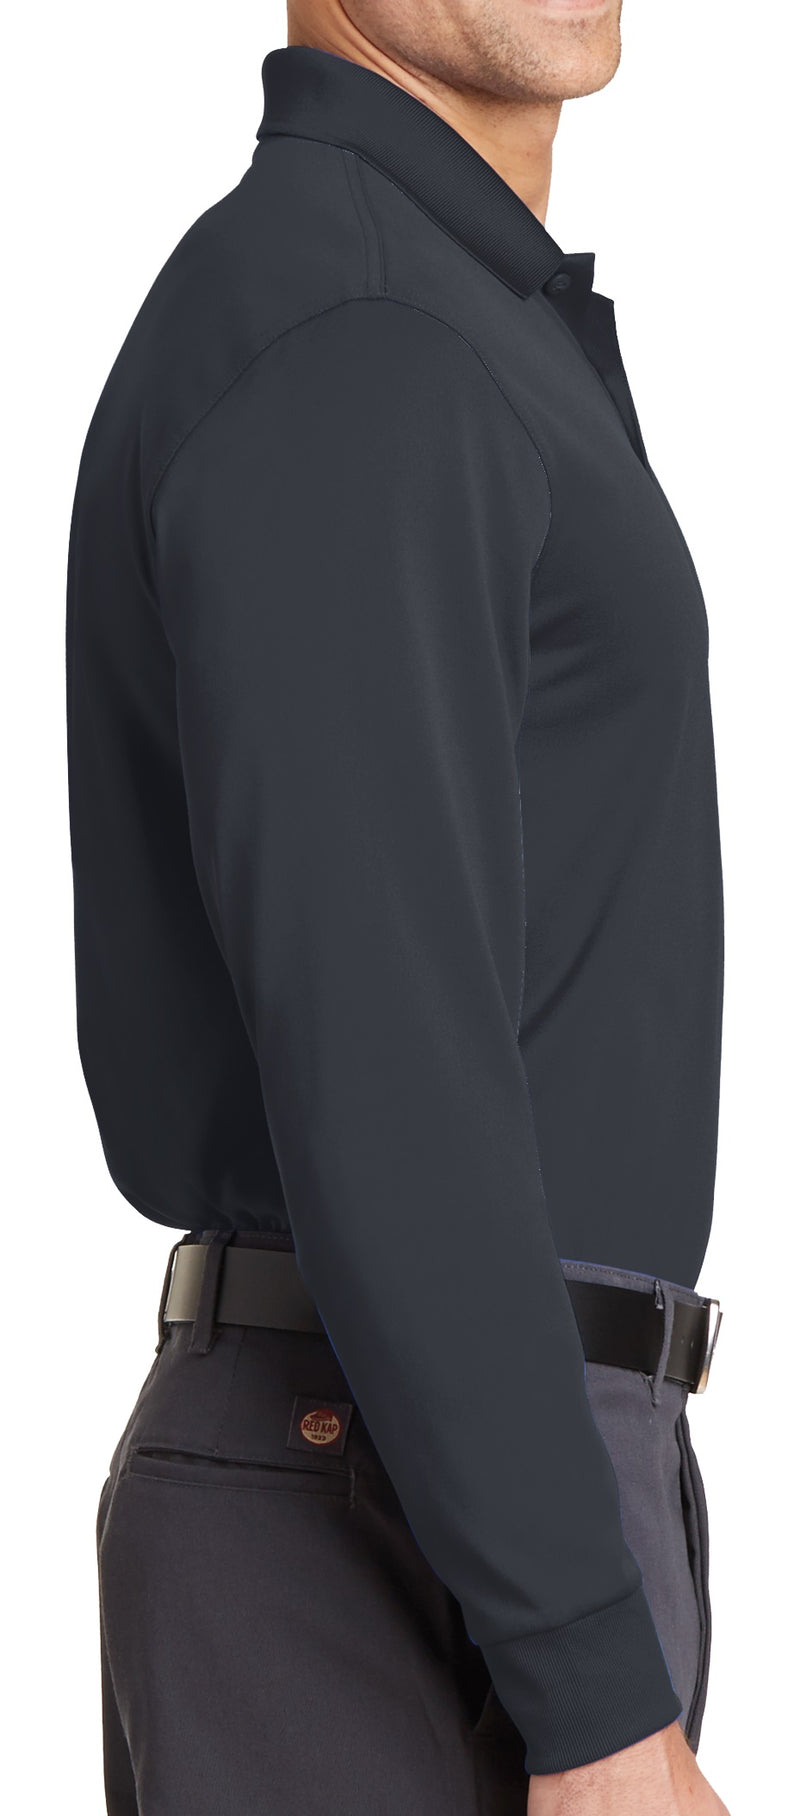 CornerStone [CS412LS] Select Snag-Proof Long Sleeve Polo. Live Chat For Bulk Discounts.